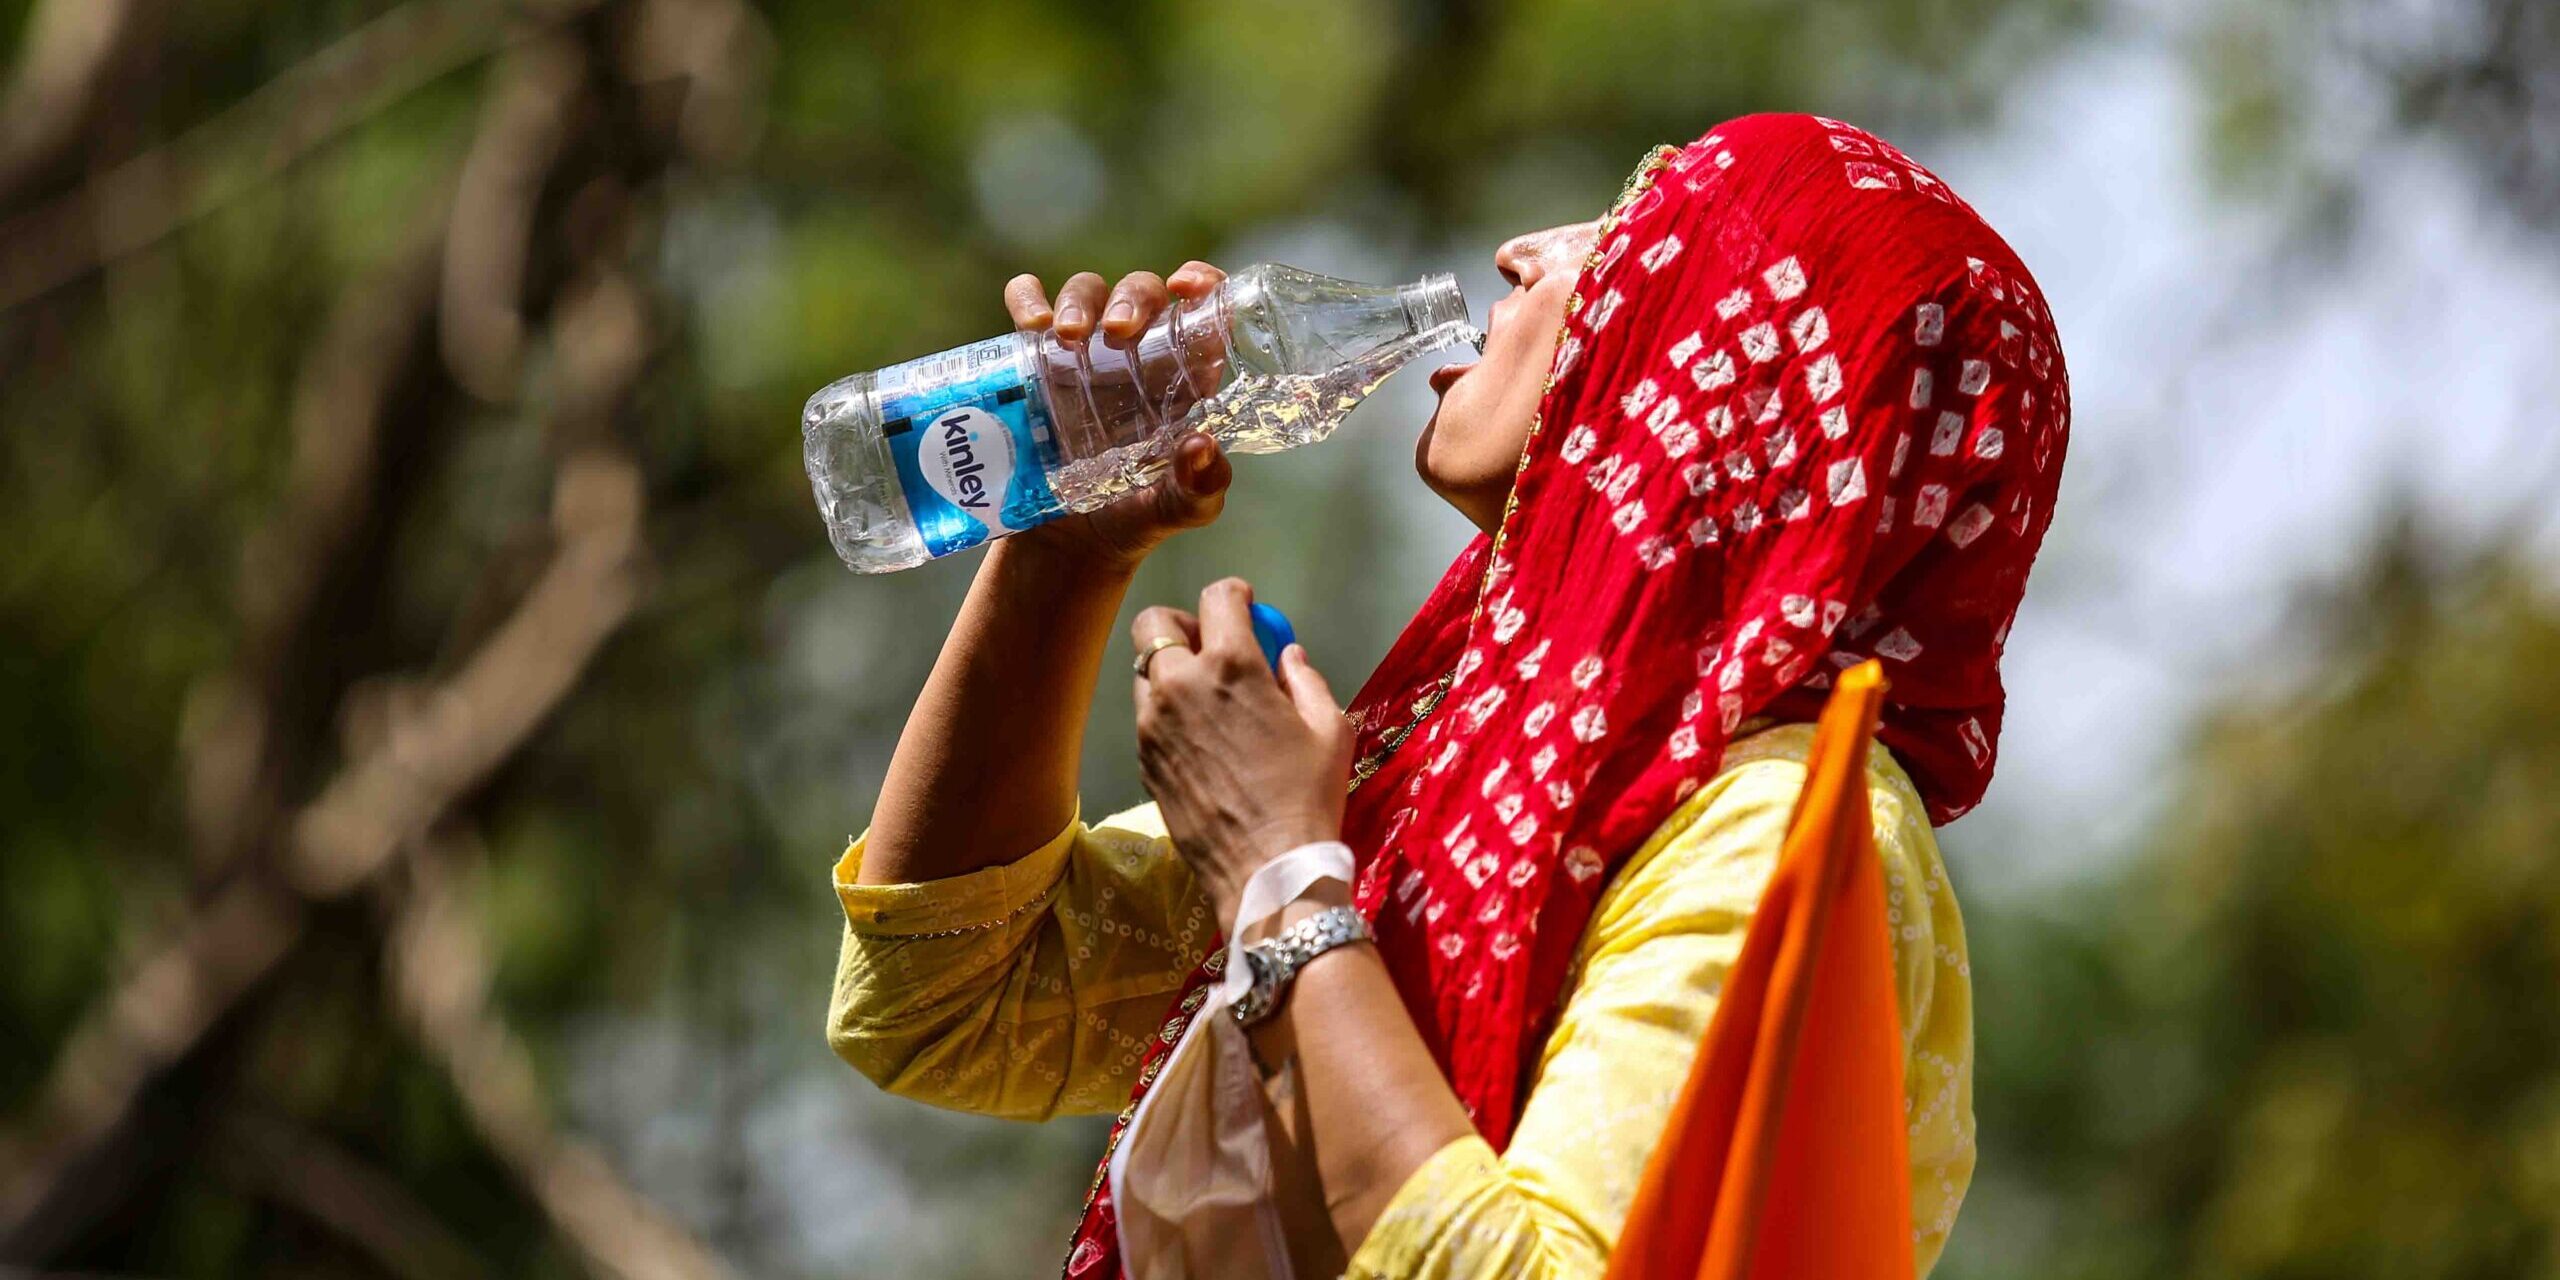 At 39.4 degrees, Delhi sees hottest day since January